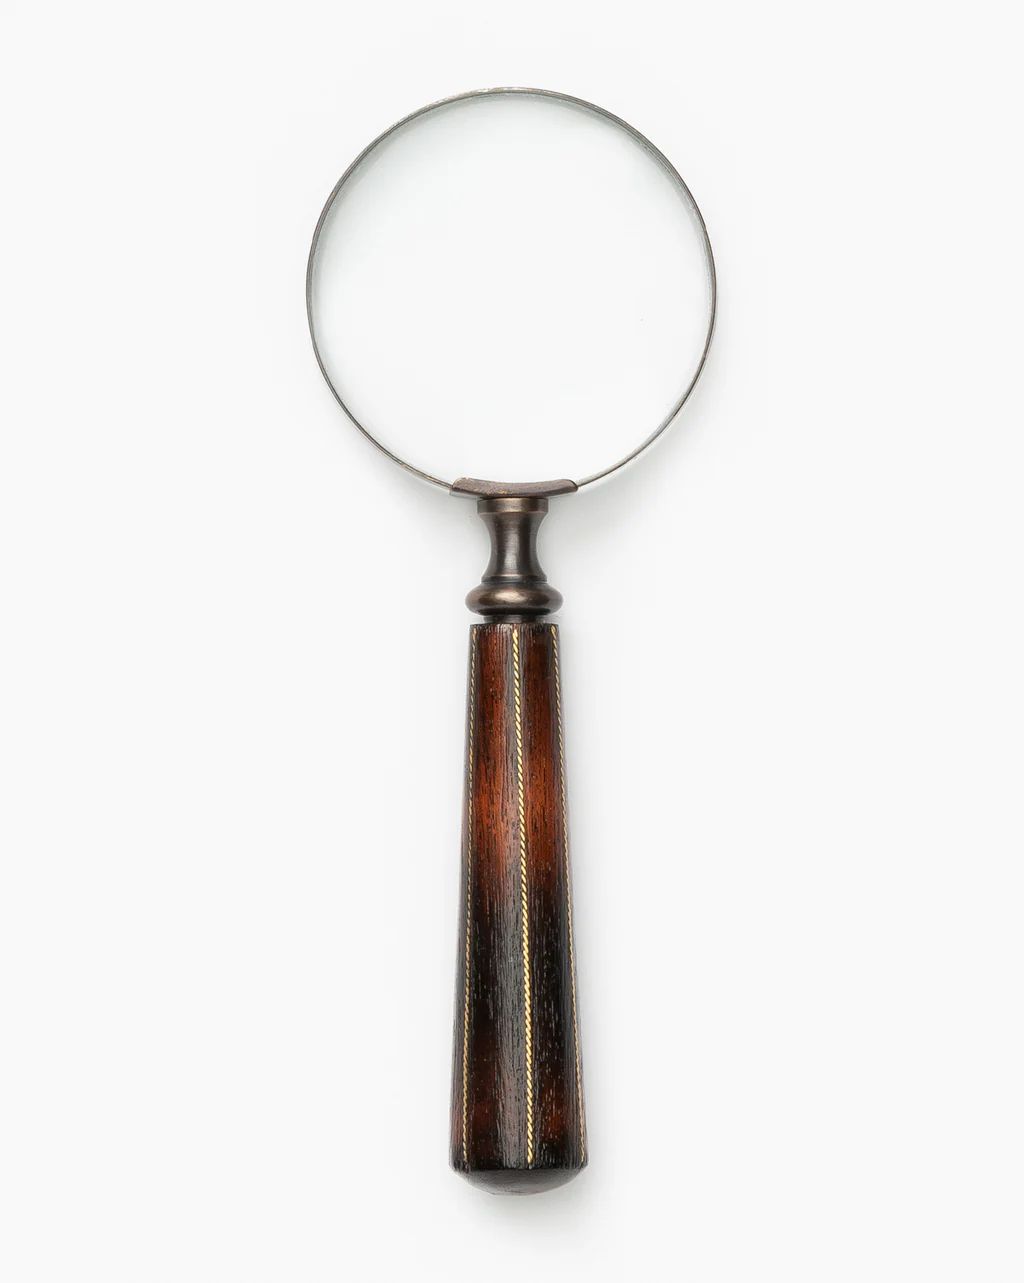 Thorpe Magnifying Glass | McGee & Co.